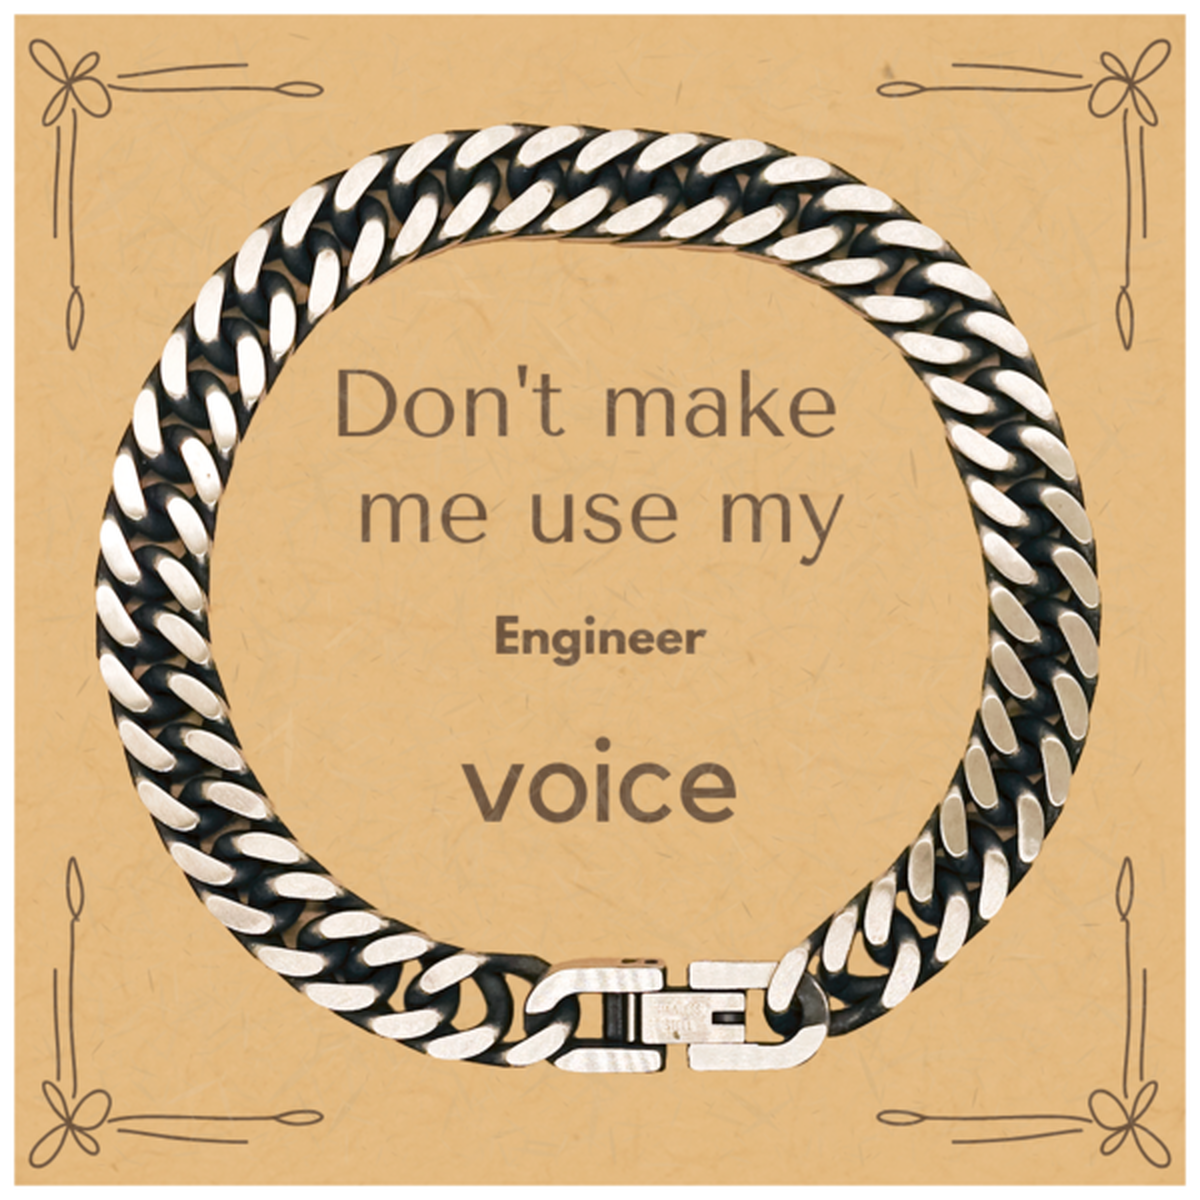 Don't make me use my Engineer voice, Sarcasm Engineer Card Gifts, Christmas Engineer Cuban Link Chain Bracelet Birthday Unique Gifts For Engineer Coworkers, Men, Women, Colleague, Friends